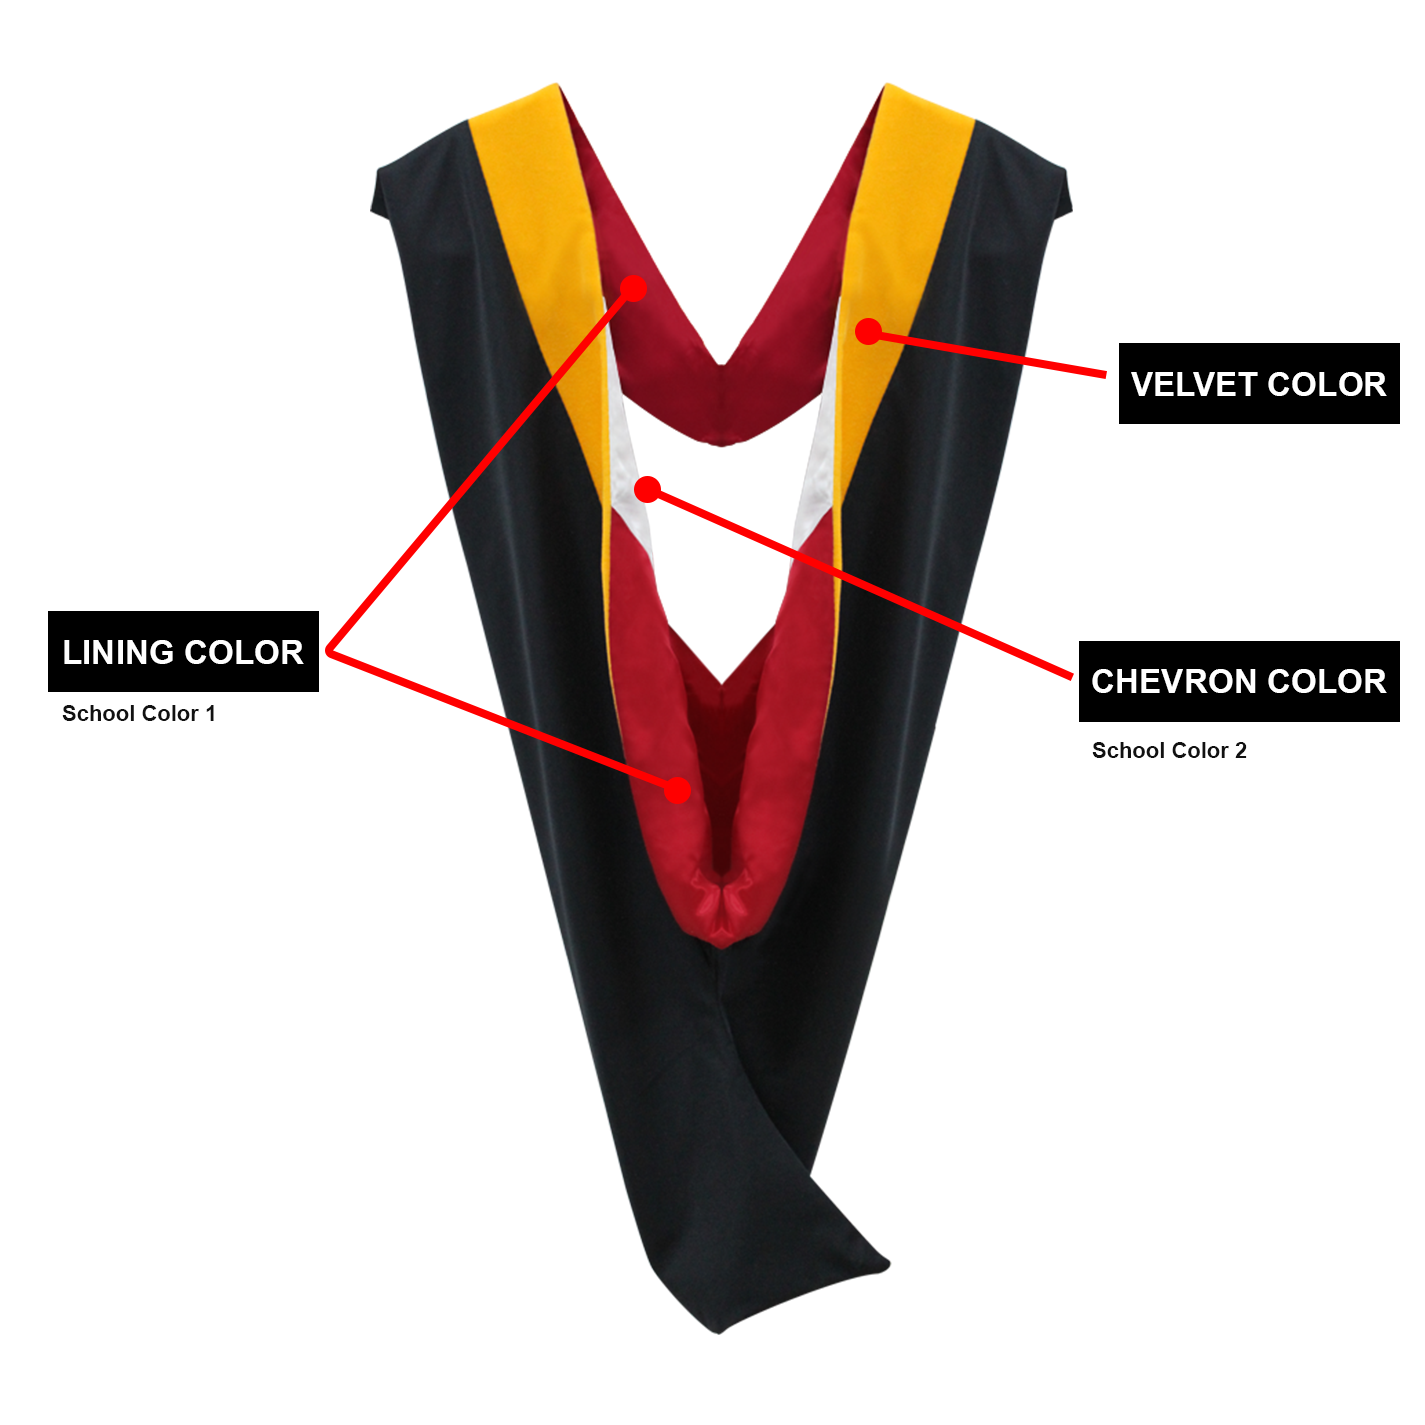 Deluxe Masters Graduation Gown & Hood Package - Graduation Attire